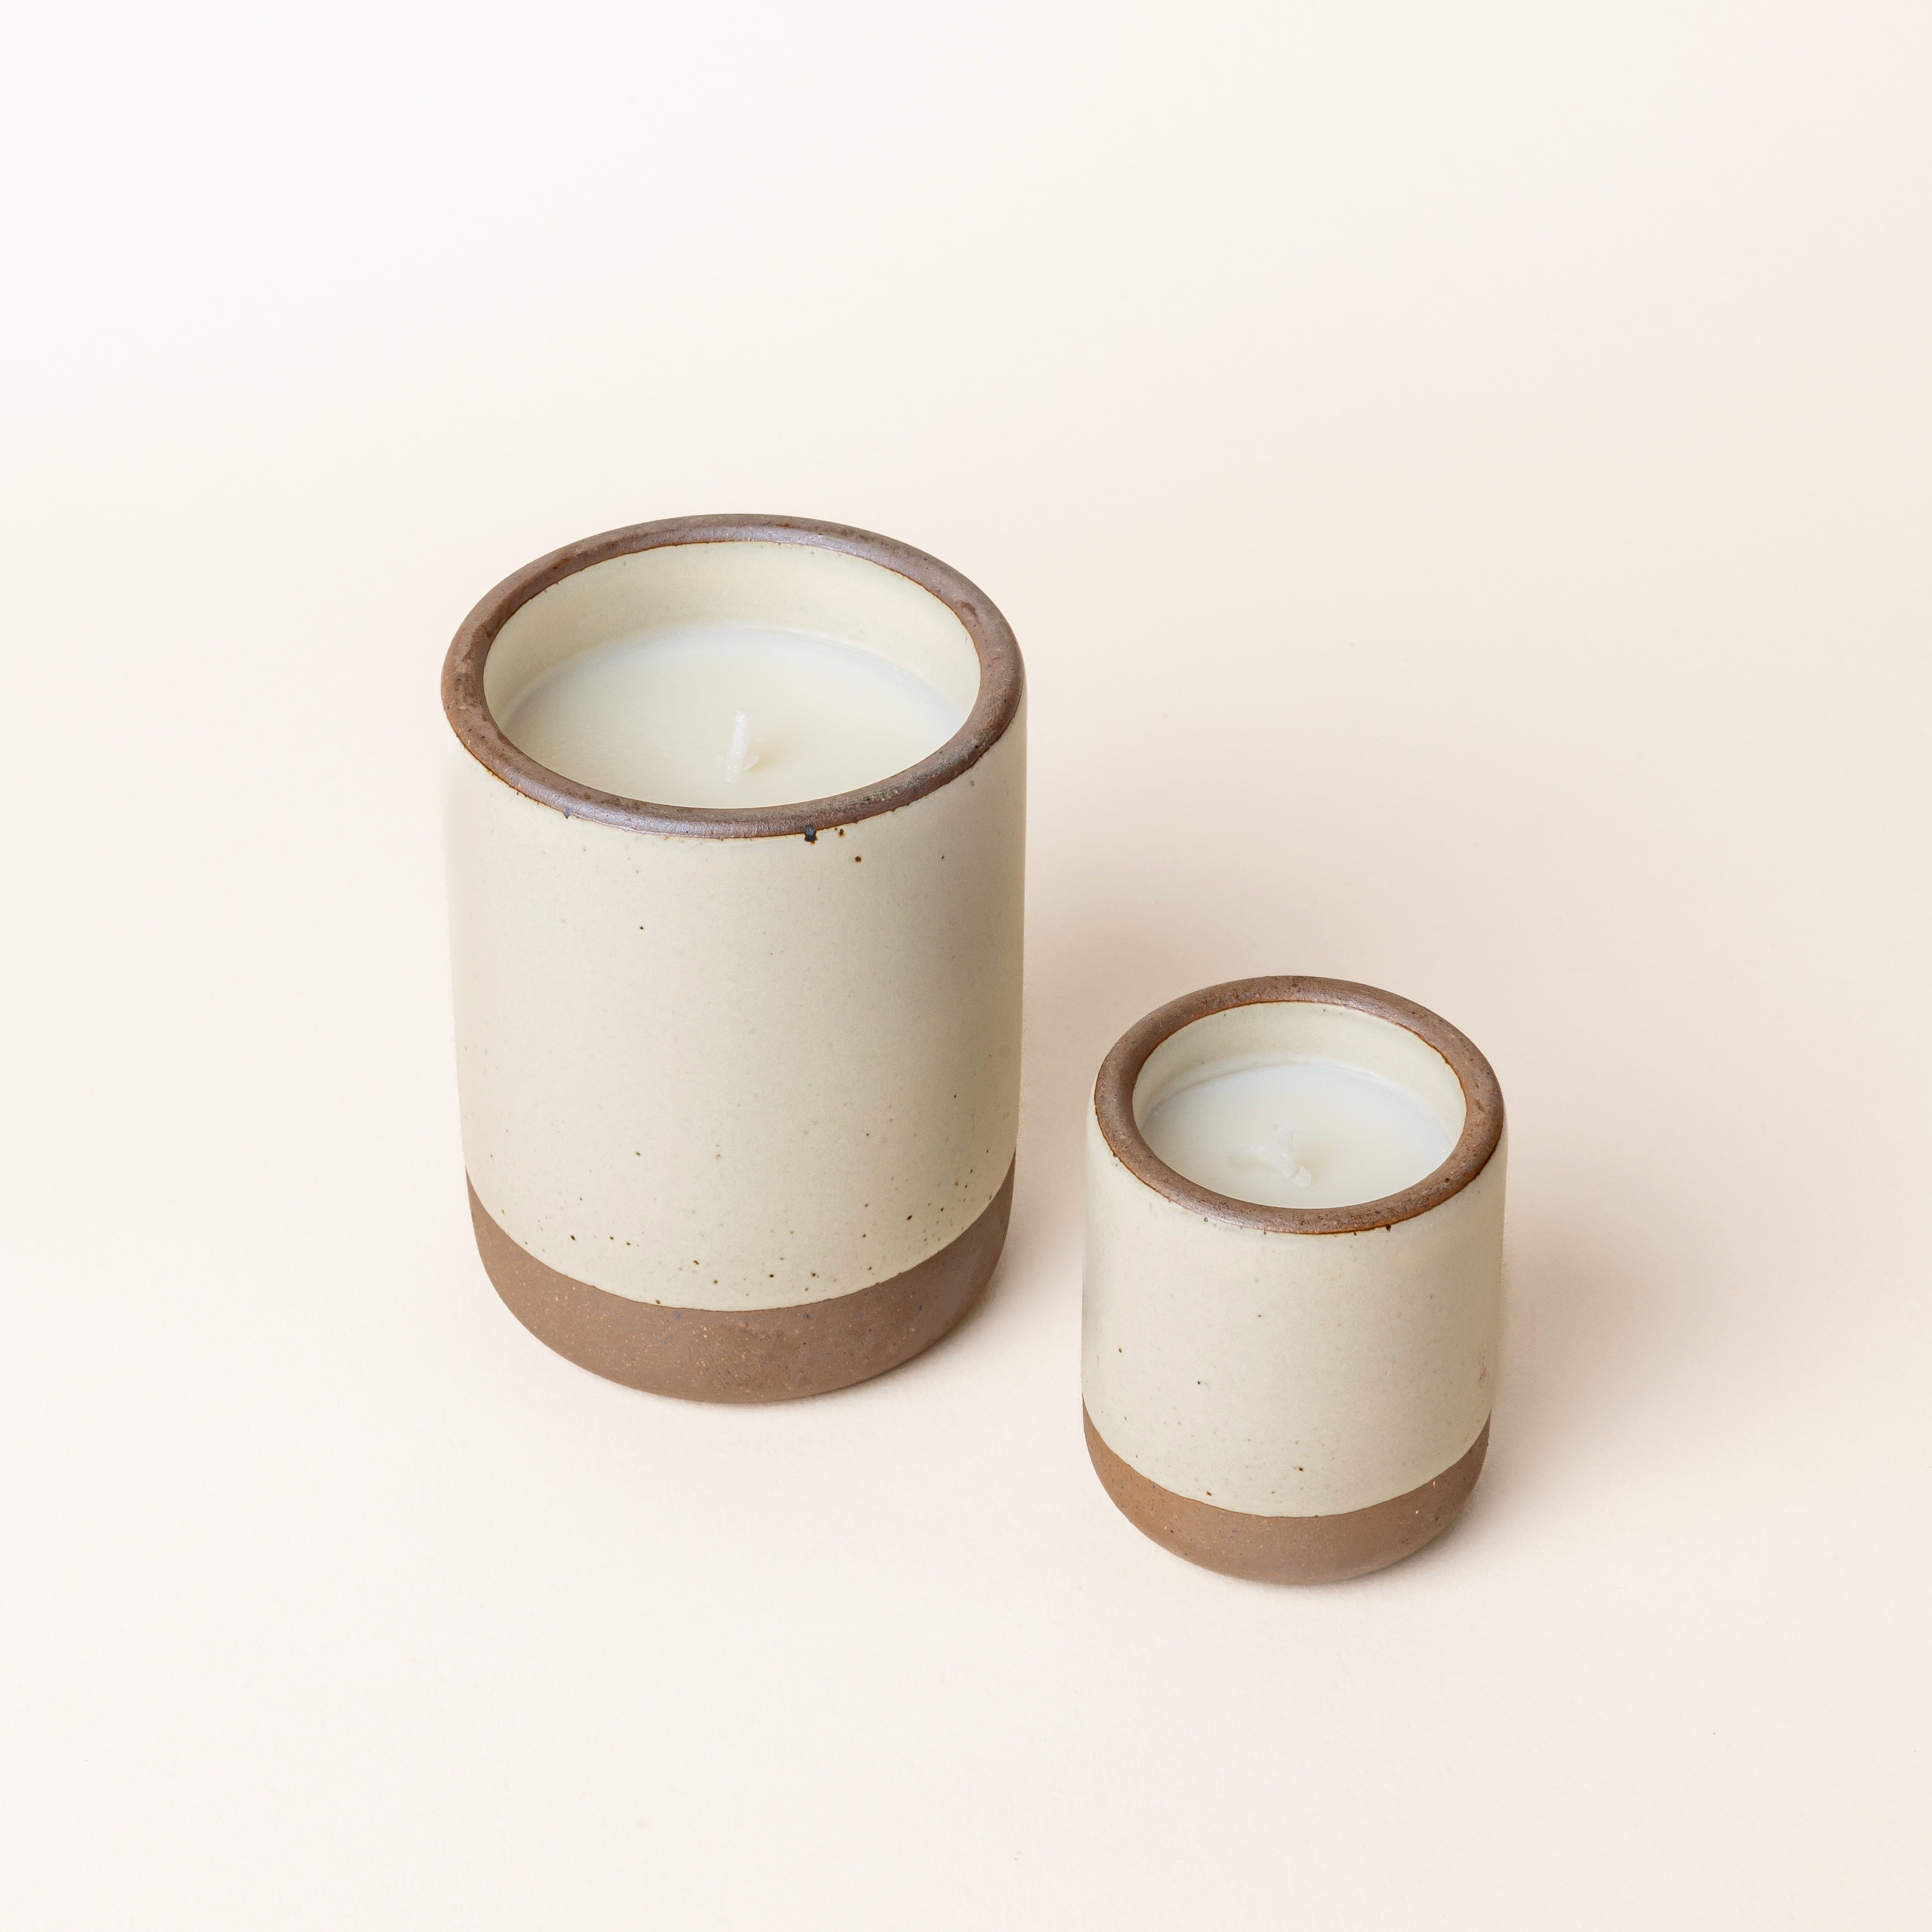 A large and small ceramic vessels in a warm, tan-toned, off-white color with candle inside each.